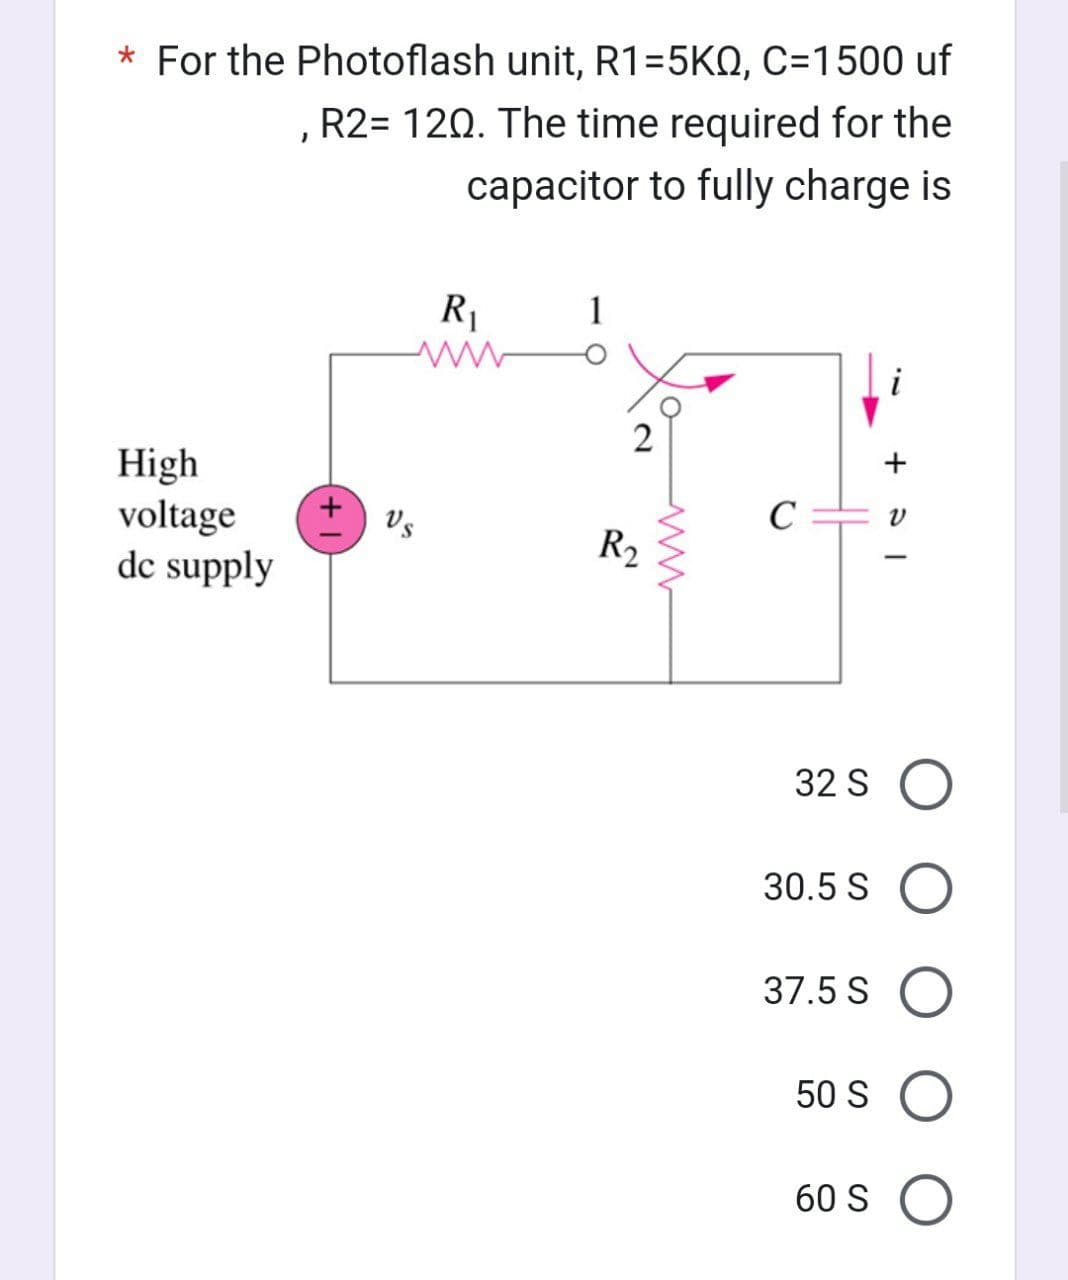 * For the Photoflash unit, R1=5KQ, C=1500 uf
R2= 120. The time required for the
capacitor to fully charge is
High
voltage
dc supply
R₁
1
2
R₂
C
32 SO
O
30.5 S
37.5 S
50 S
60 S O